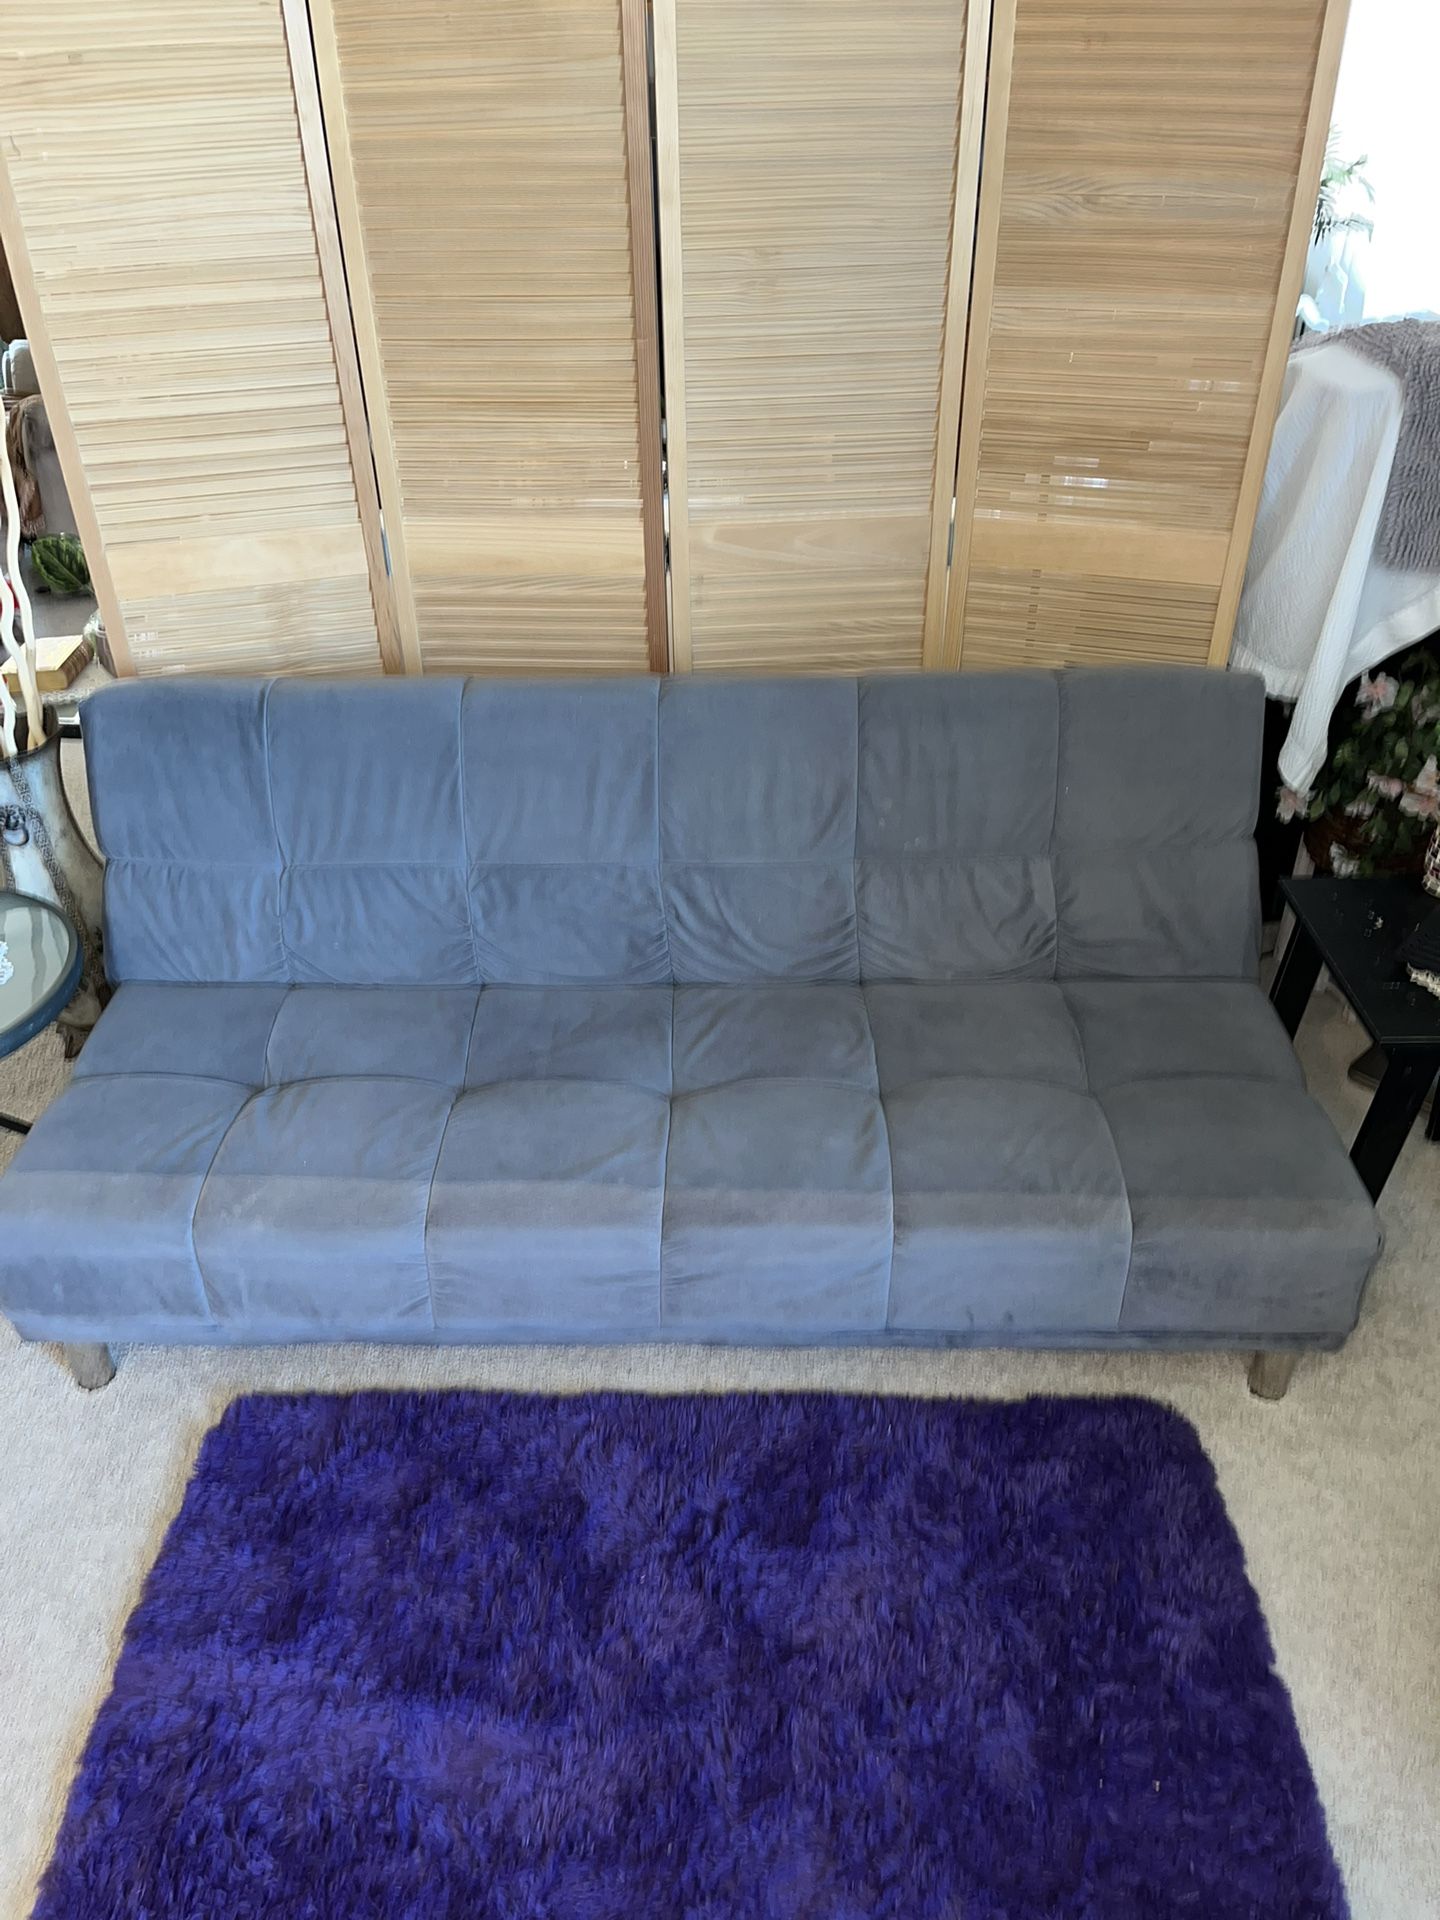 Futon sofa bed couch ( grey )70”X 40”